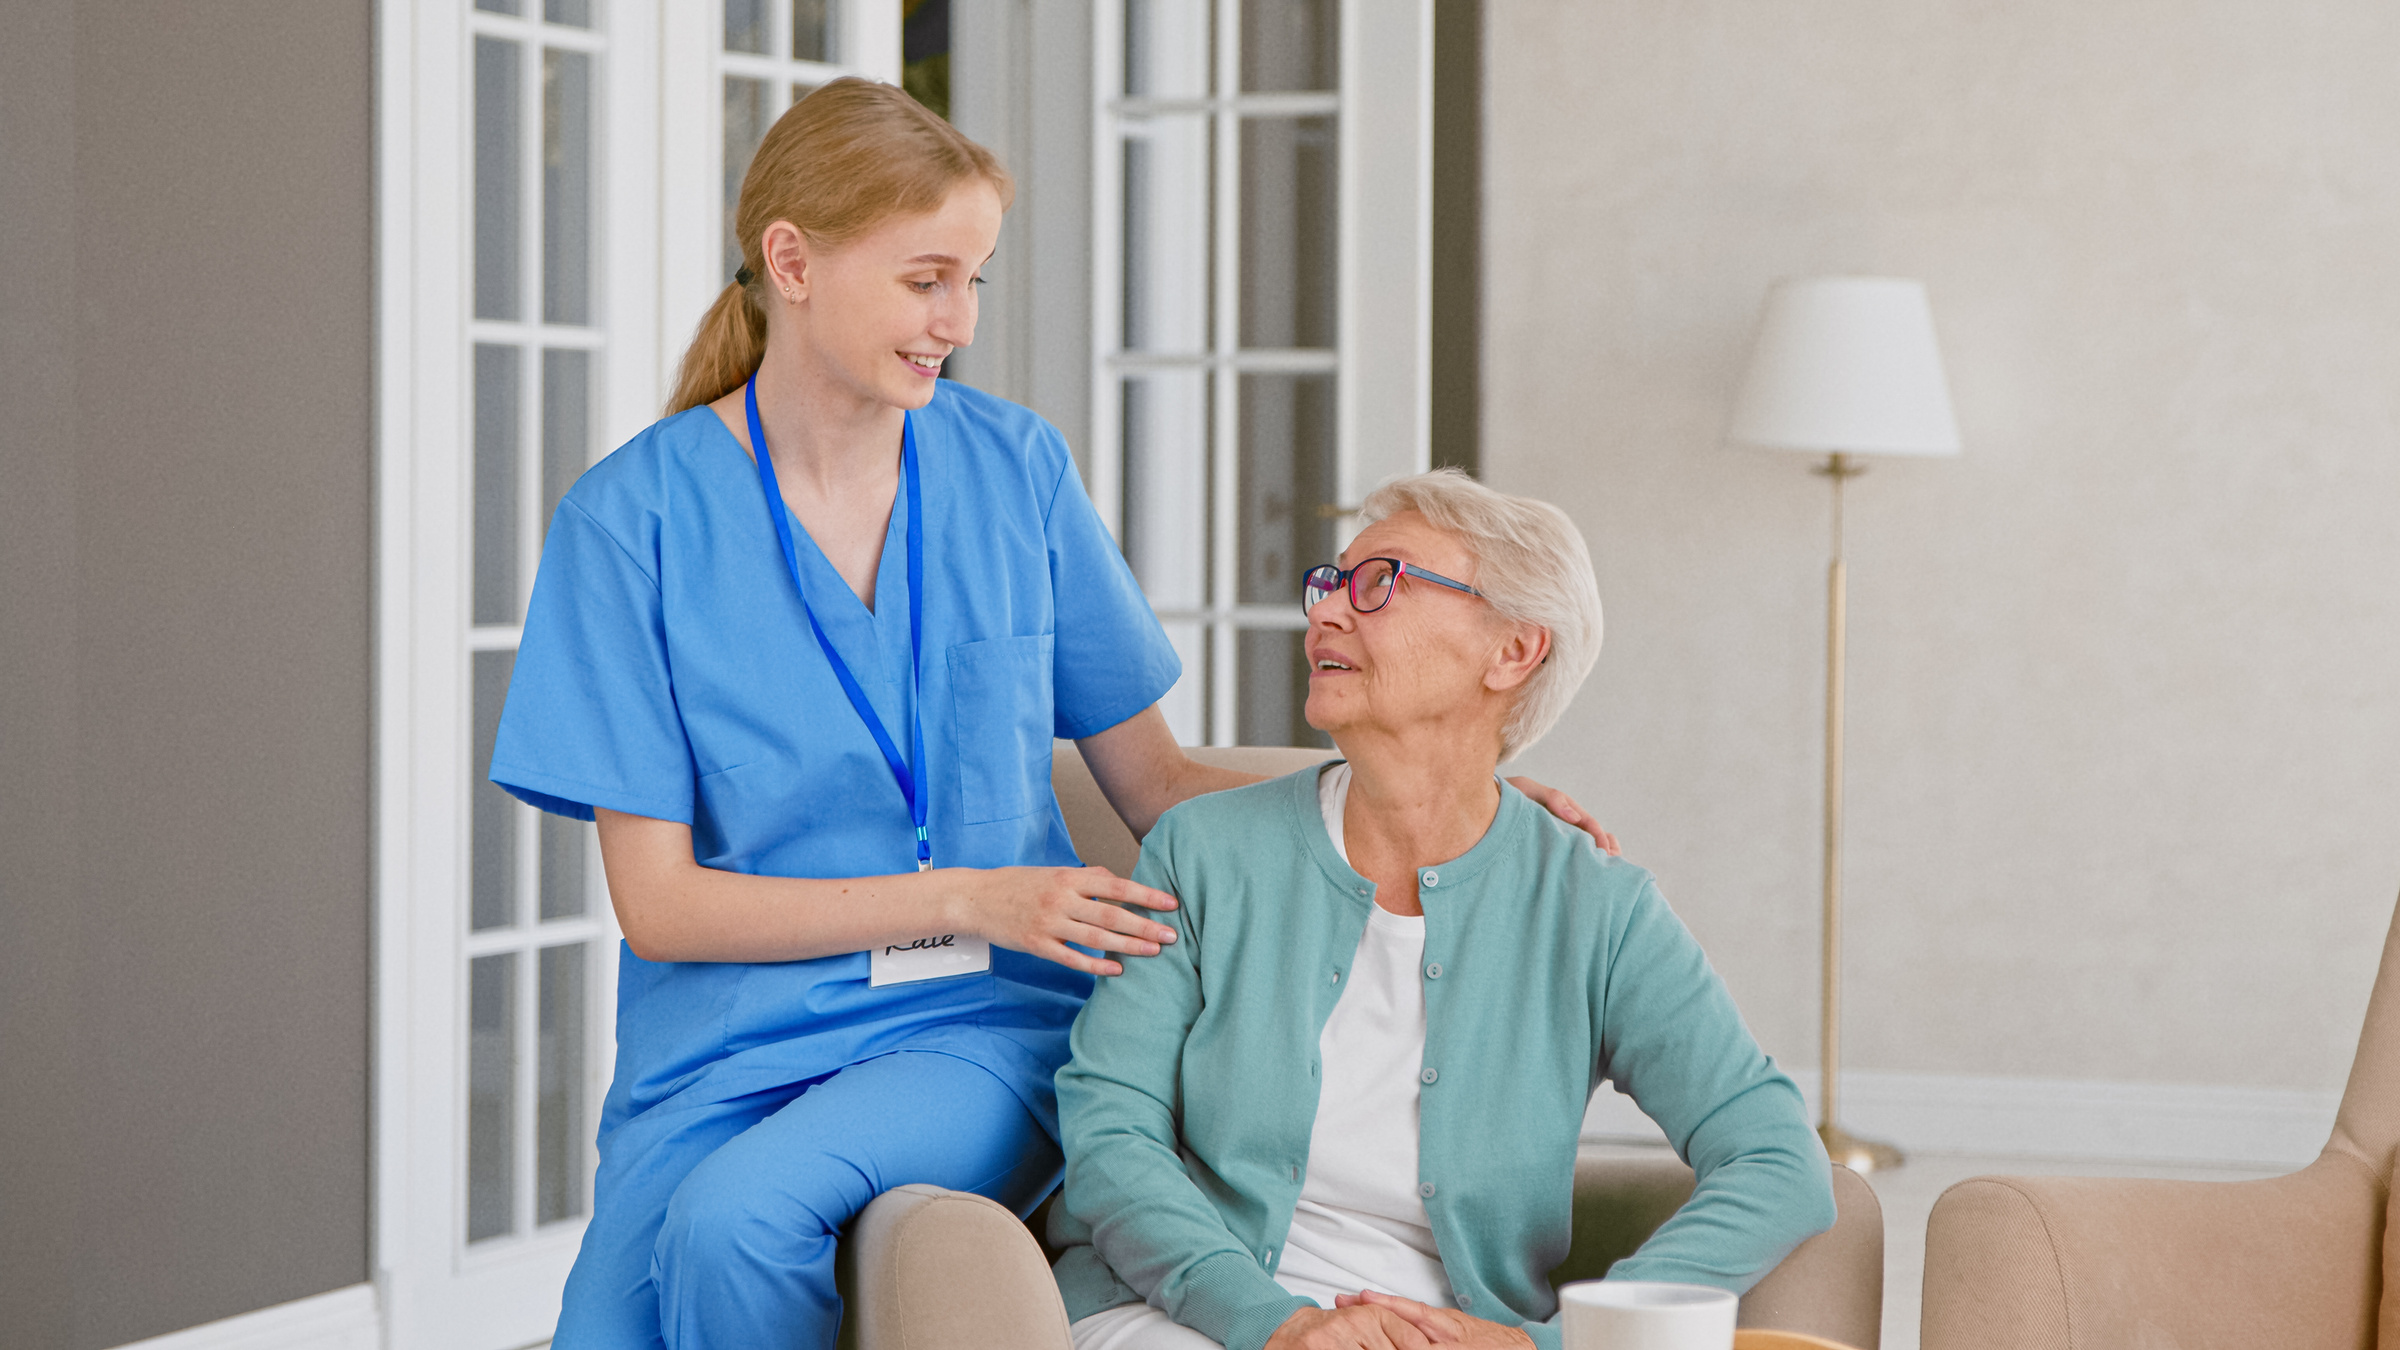 Smiling young blonde nurse in uniform takes care of woman